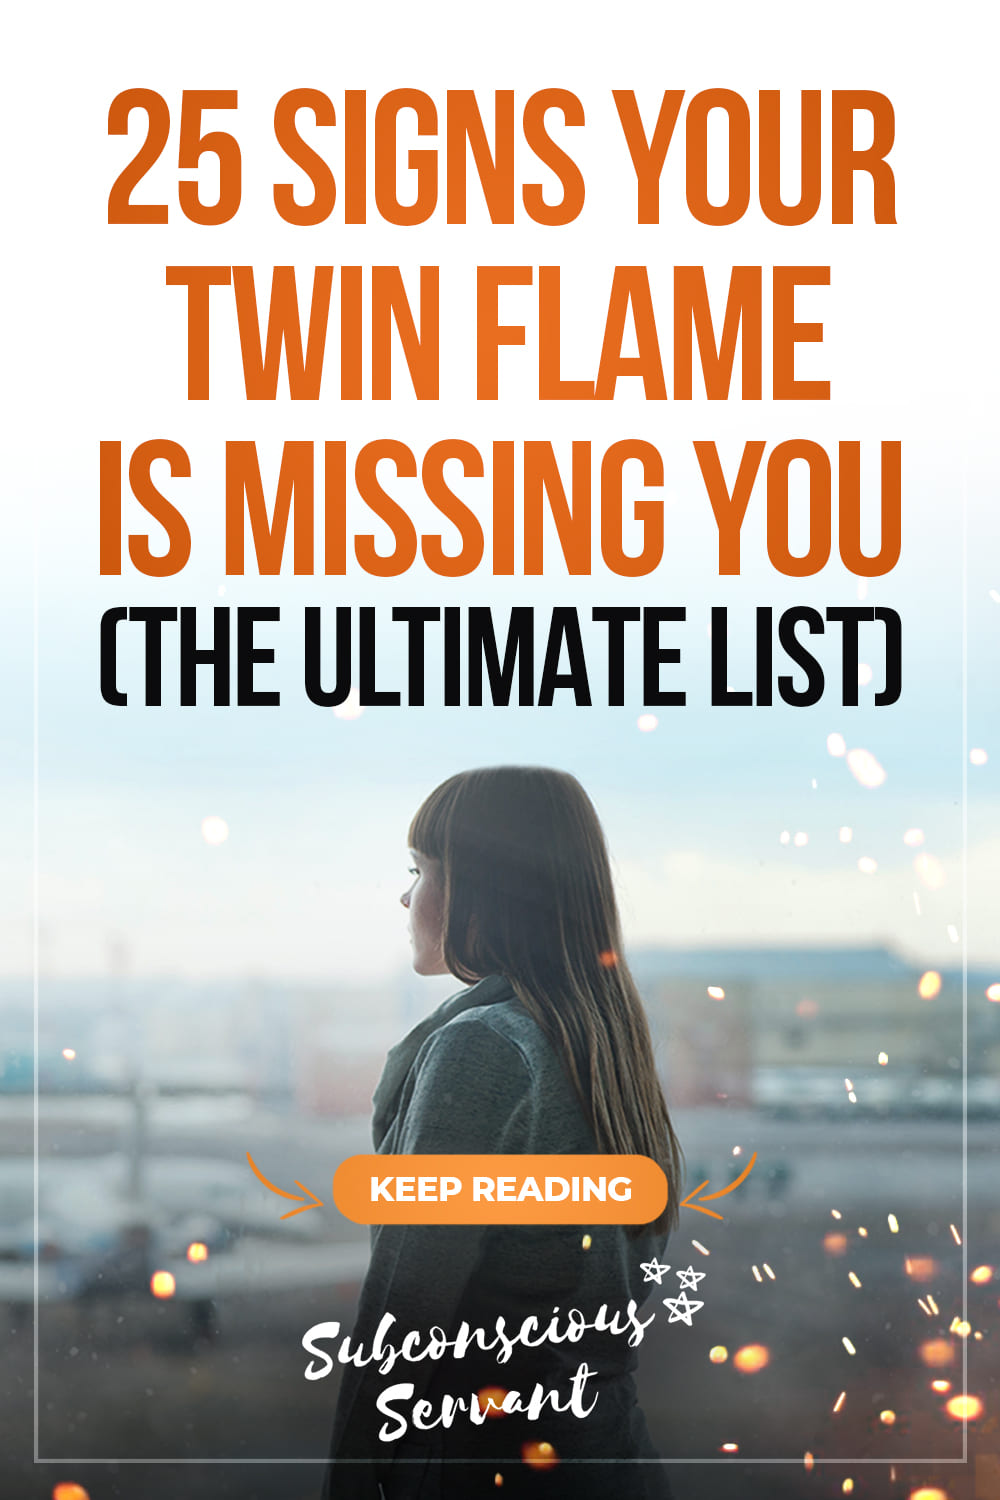 25 Signs Your Twin Flame Is Missing You